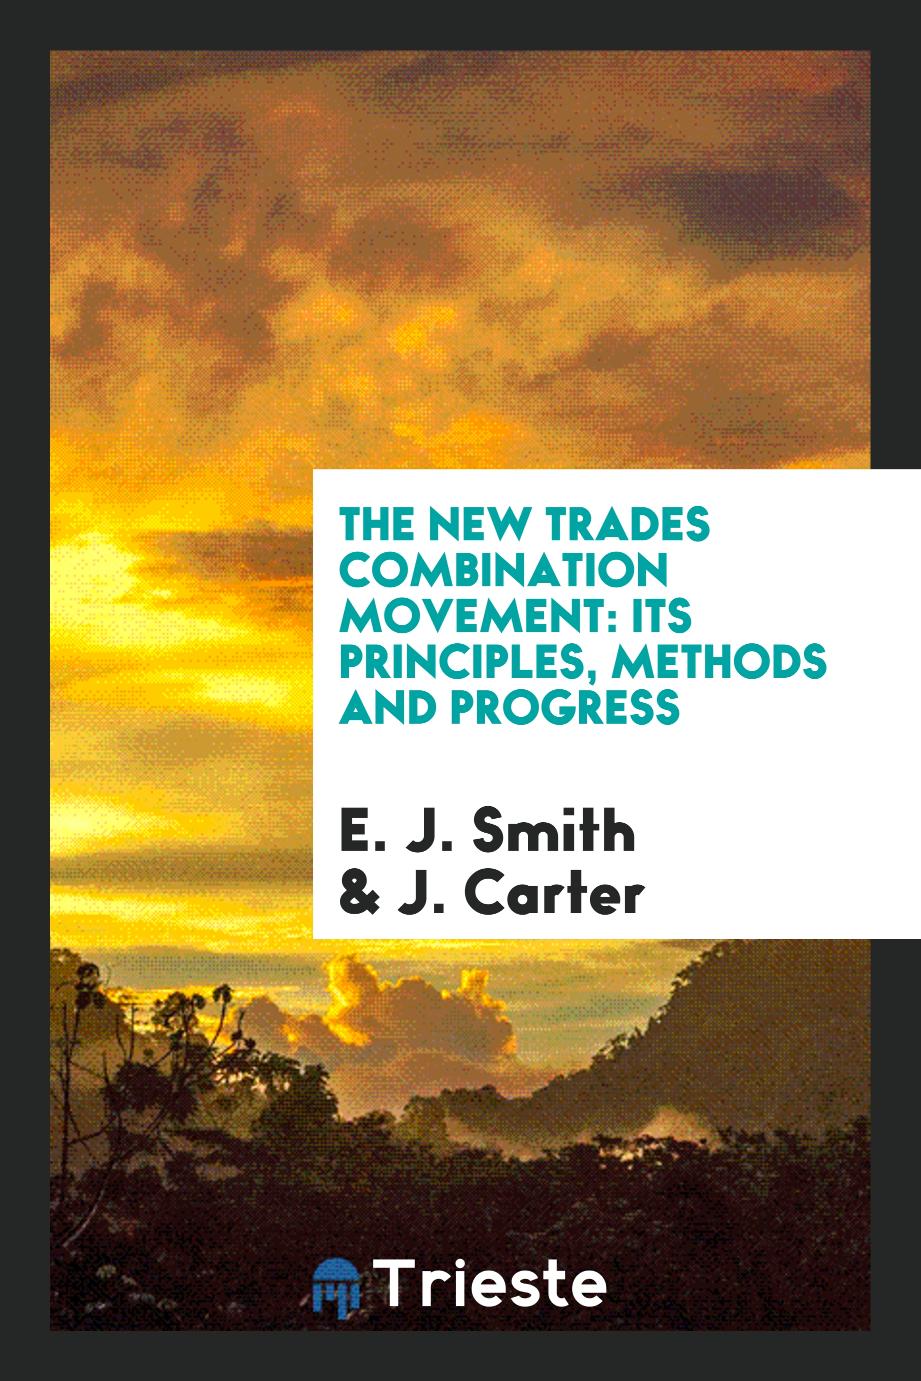 The New Trades Combination Movement: Its Principles, Methods and Progress